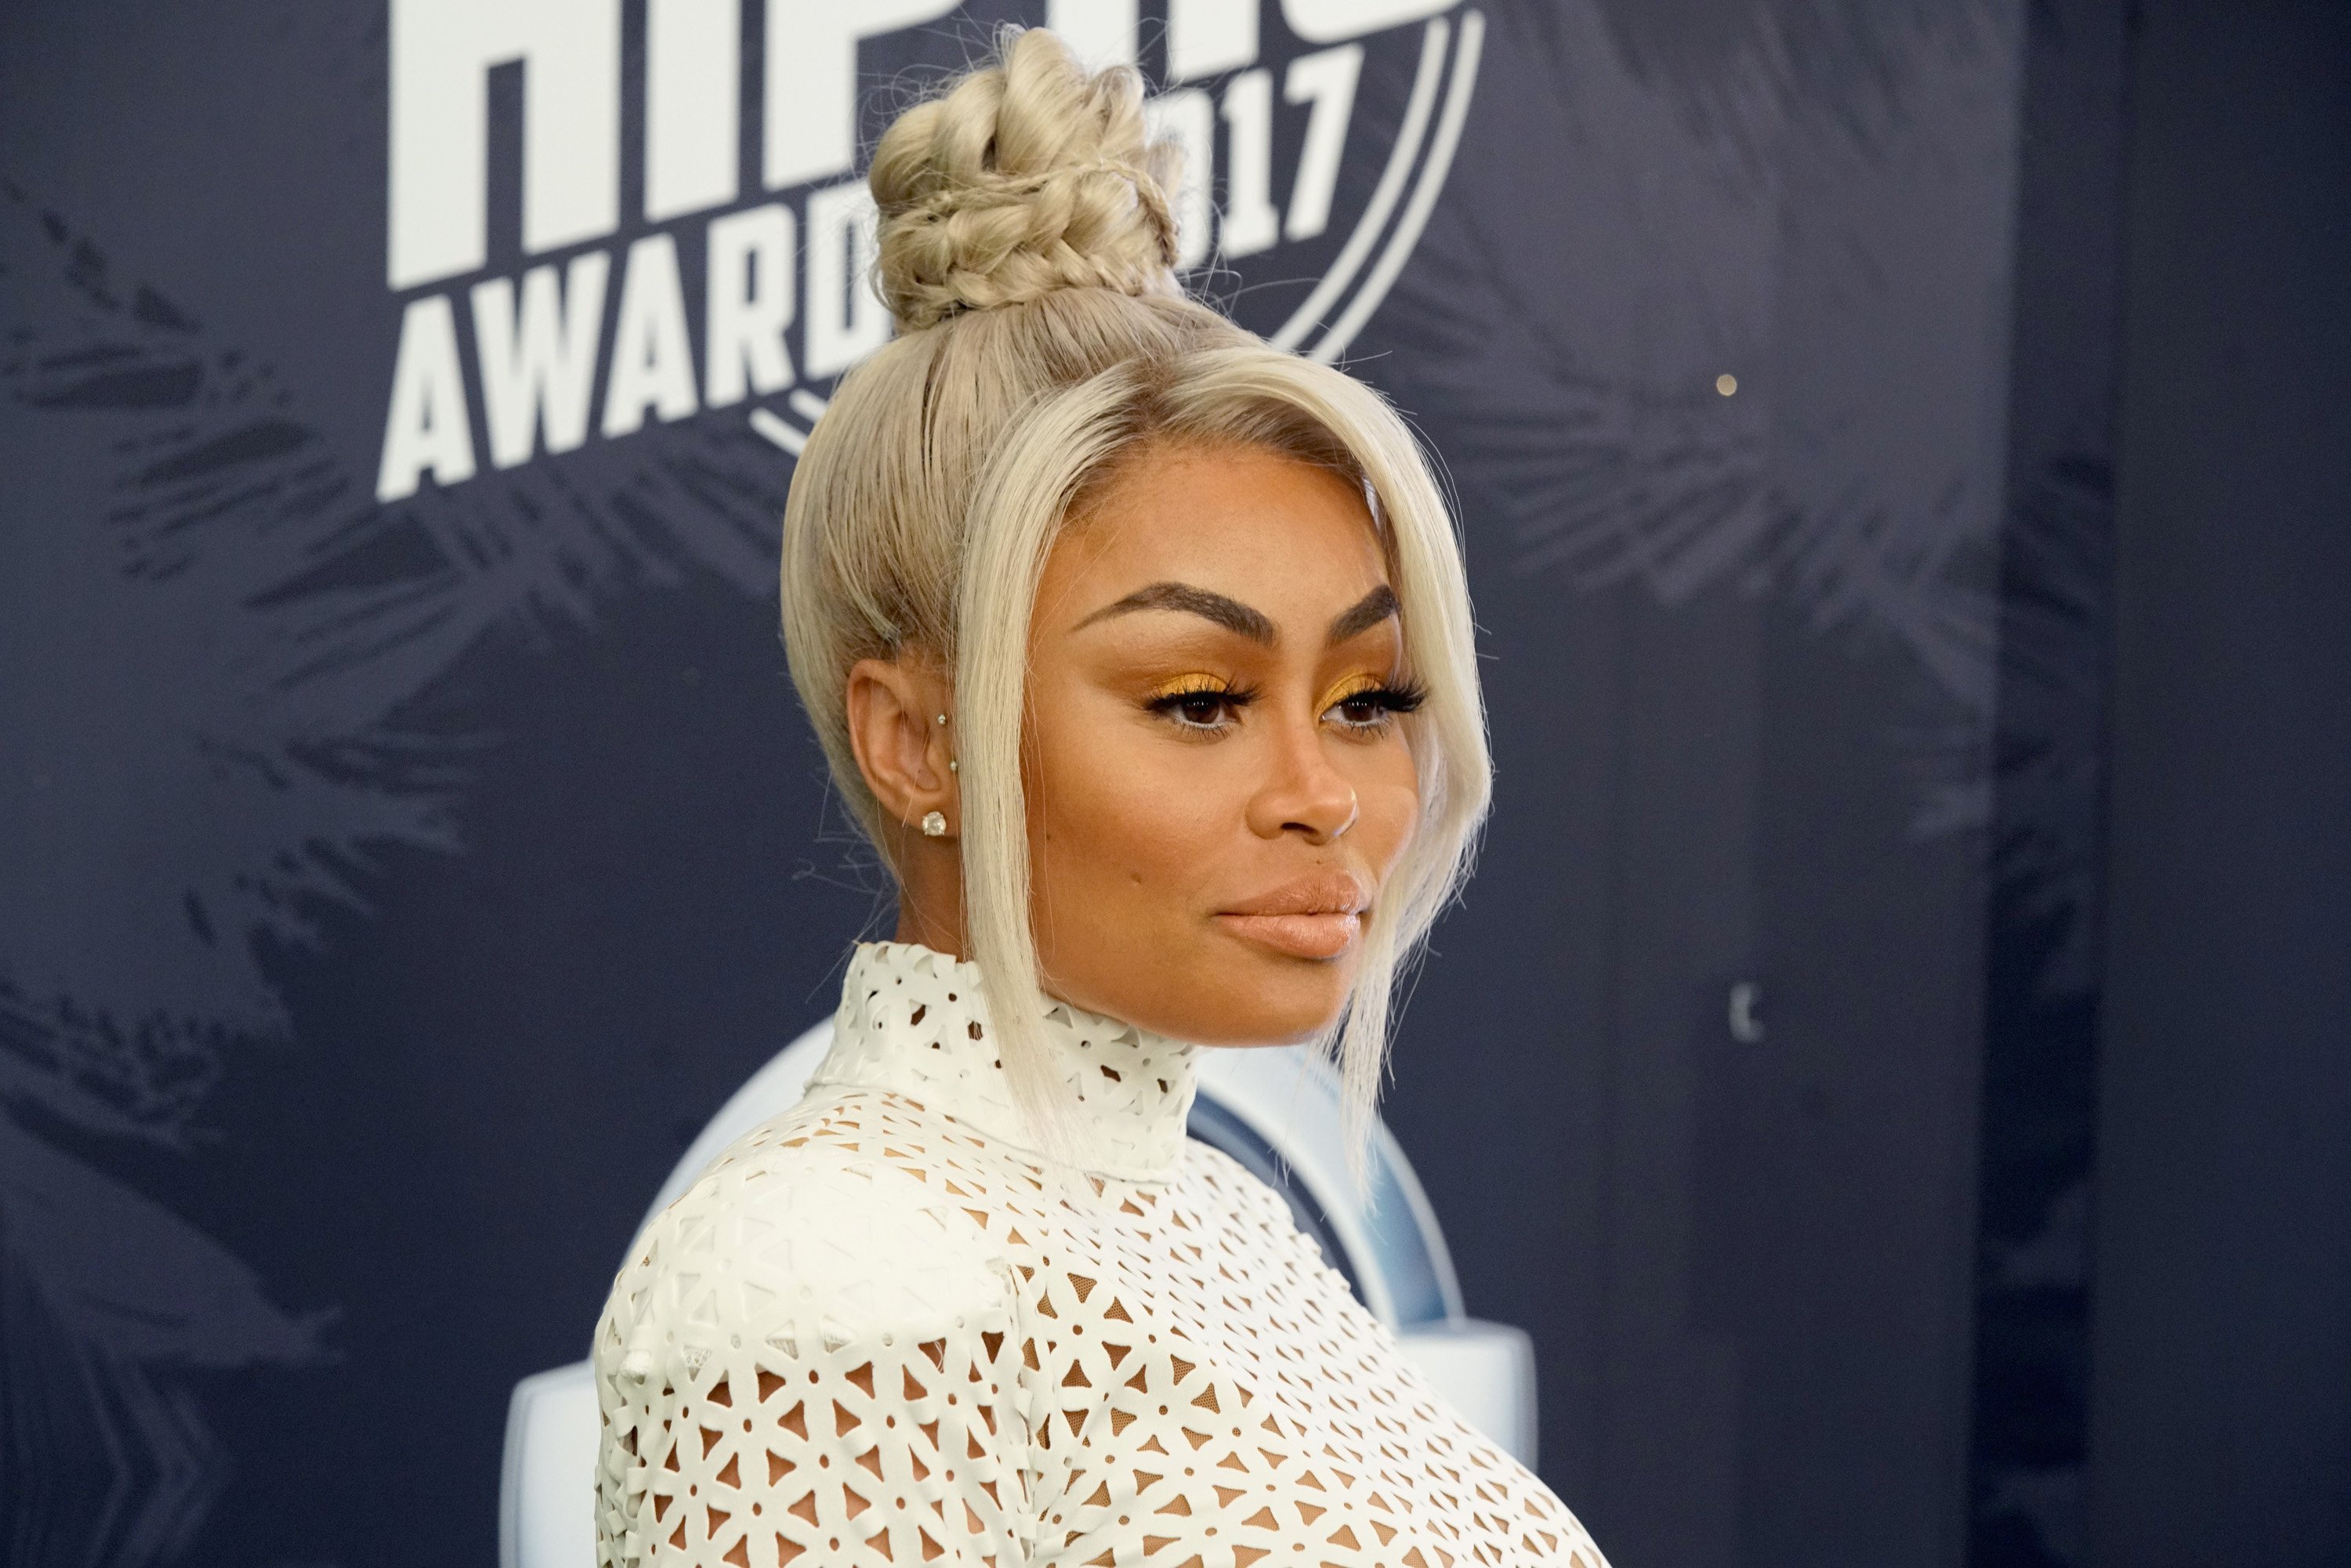 Blac Chyna attending the BET Hip Hop Awards in October 2017. | Photo: Getty Images